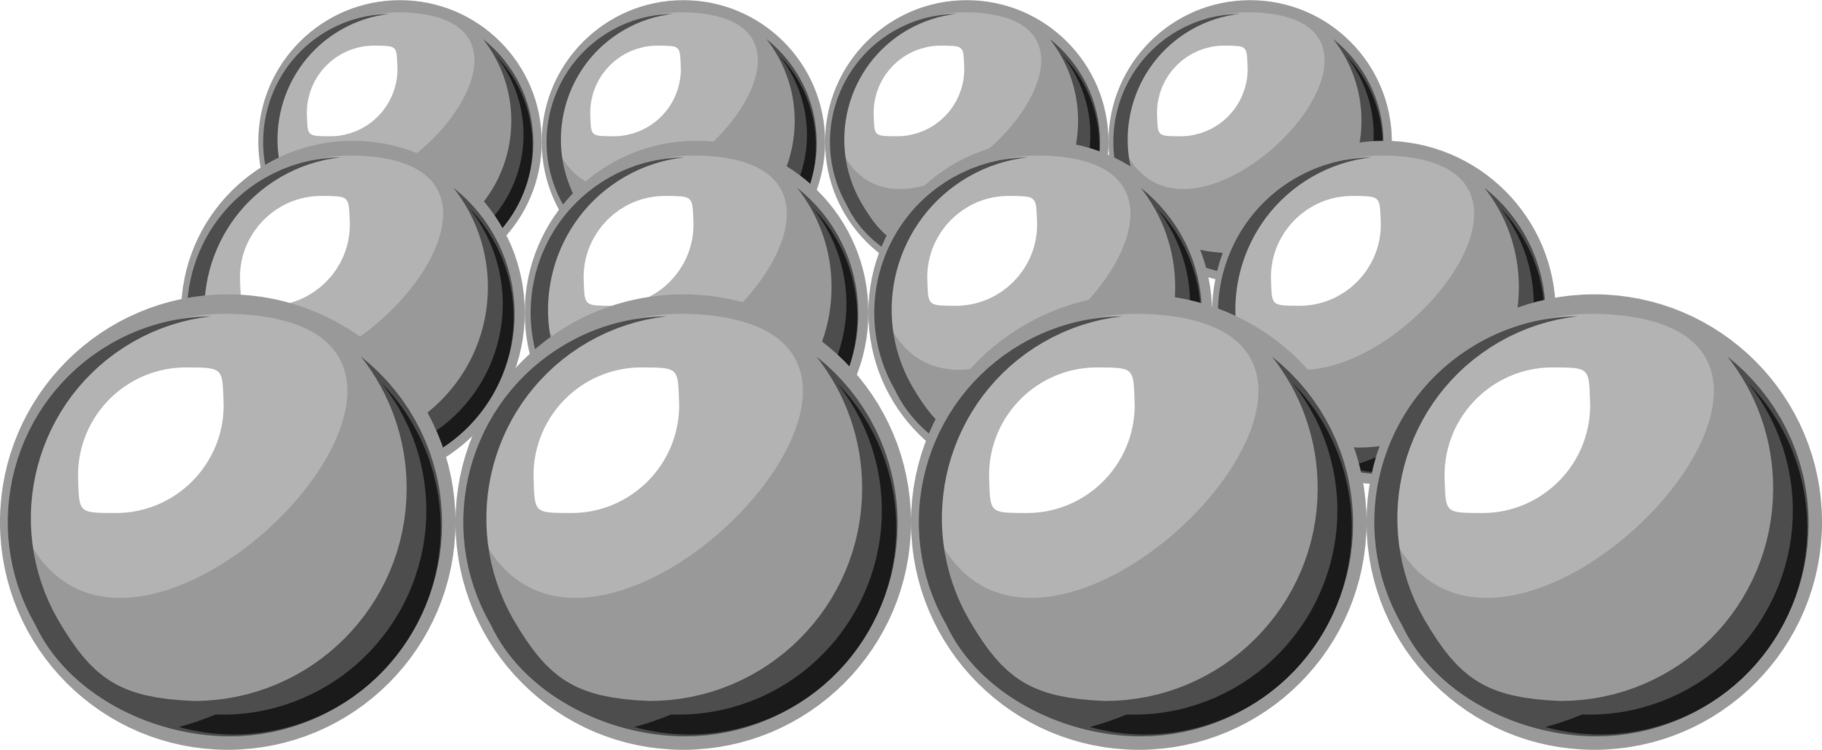 Snooker Balls Triangle Formation PNG image